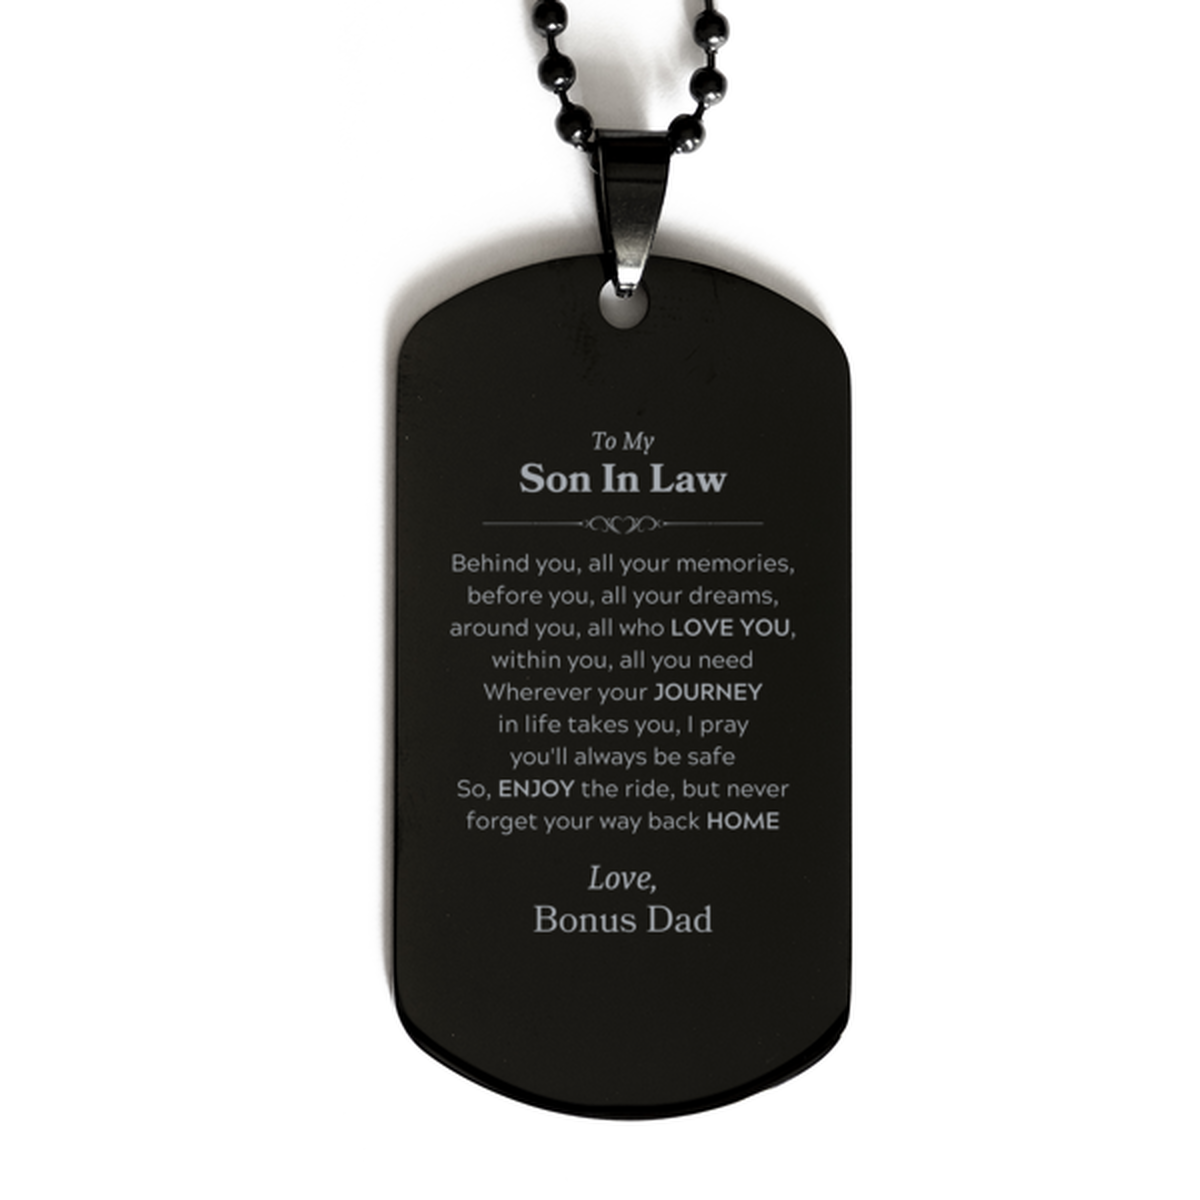 To My Son In Law Graduation Gifts from Bonus Dad, Son In Law Black Dog Tag Christmas Birthday Gifts for Son In Law Behind you, all your memories, before you, all your dreams. Love, Bonus Dad